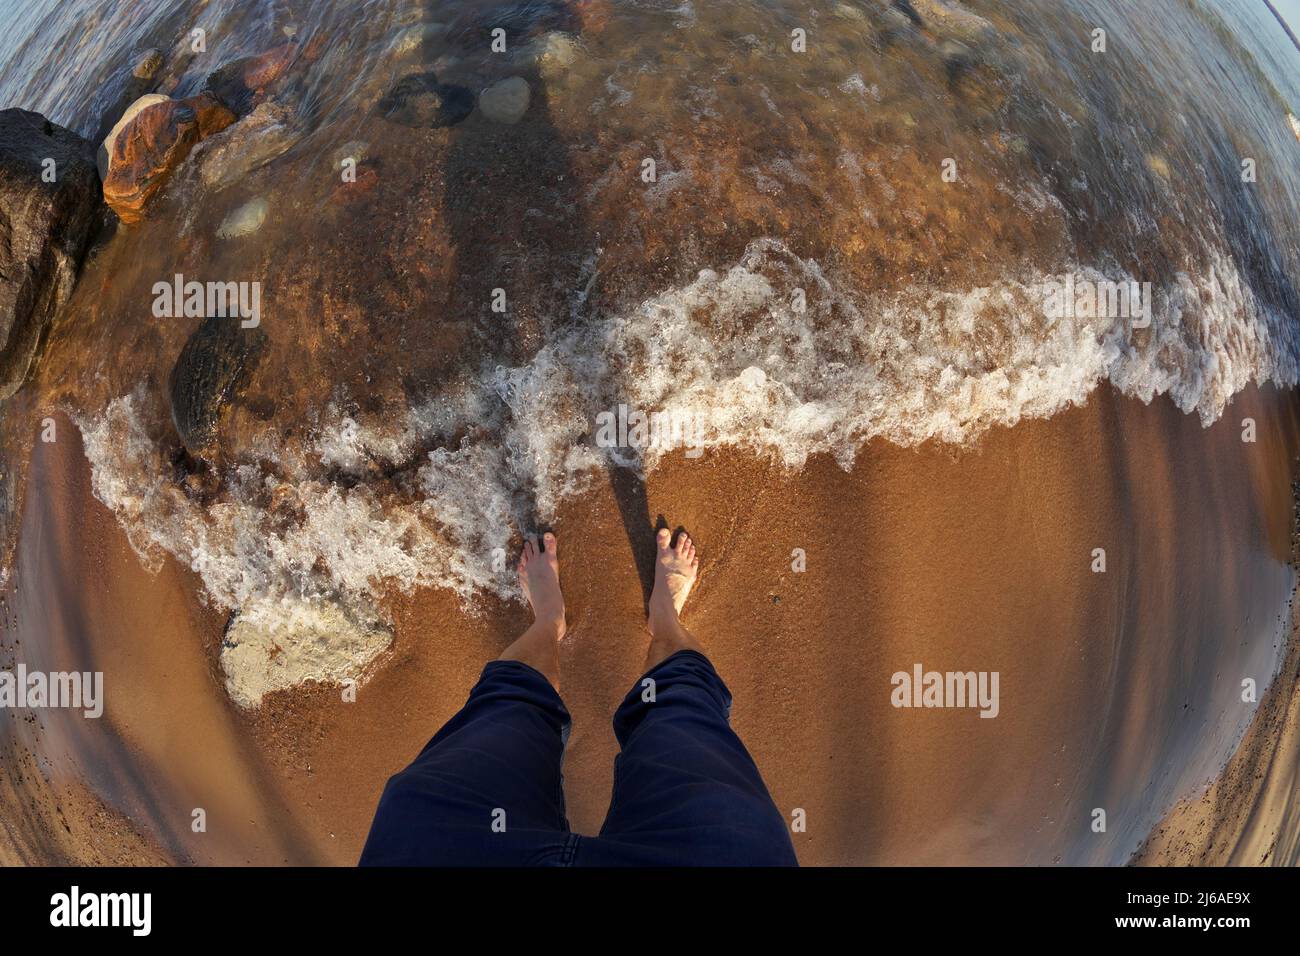 First Person Fisheye Perspective of Man's Feet in Shallow Water with Waves Rolling into Sandy Beach Stock Photo